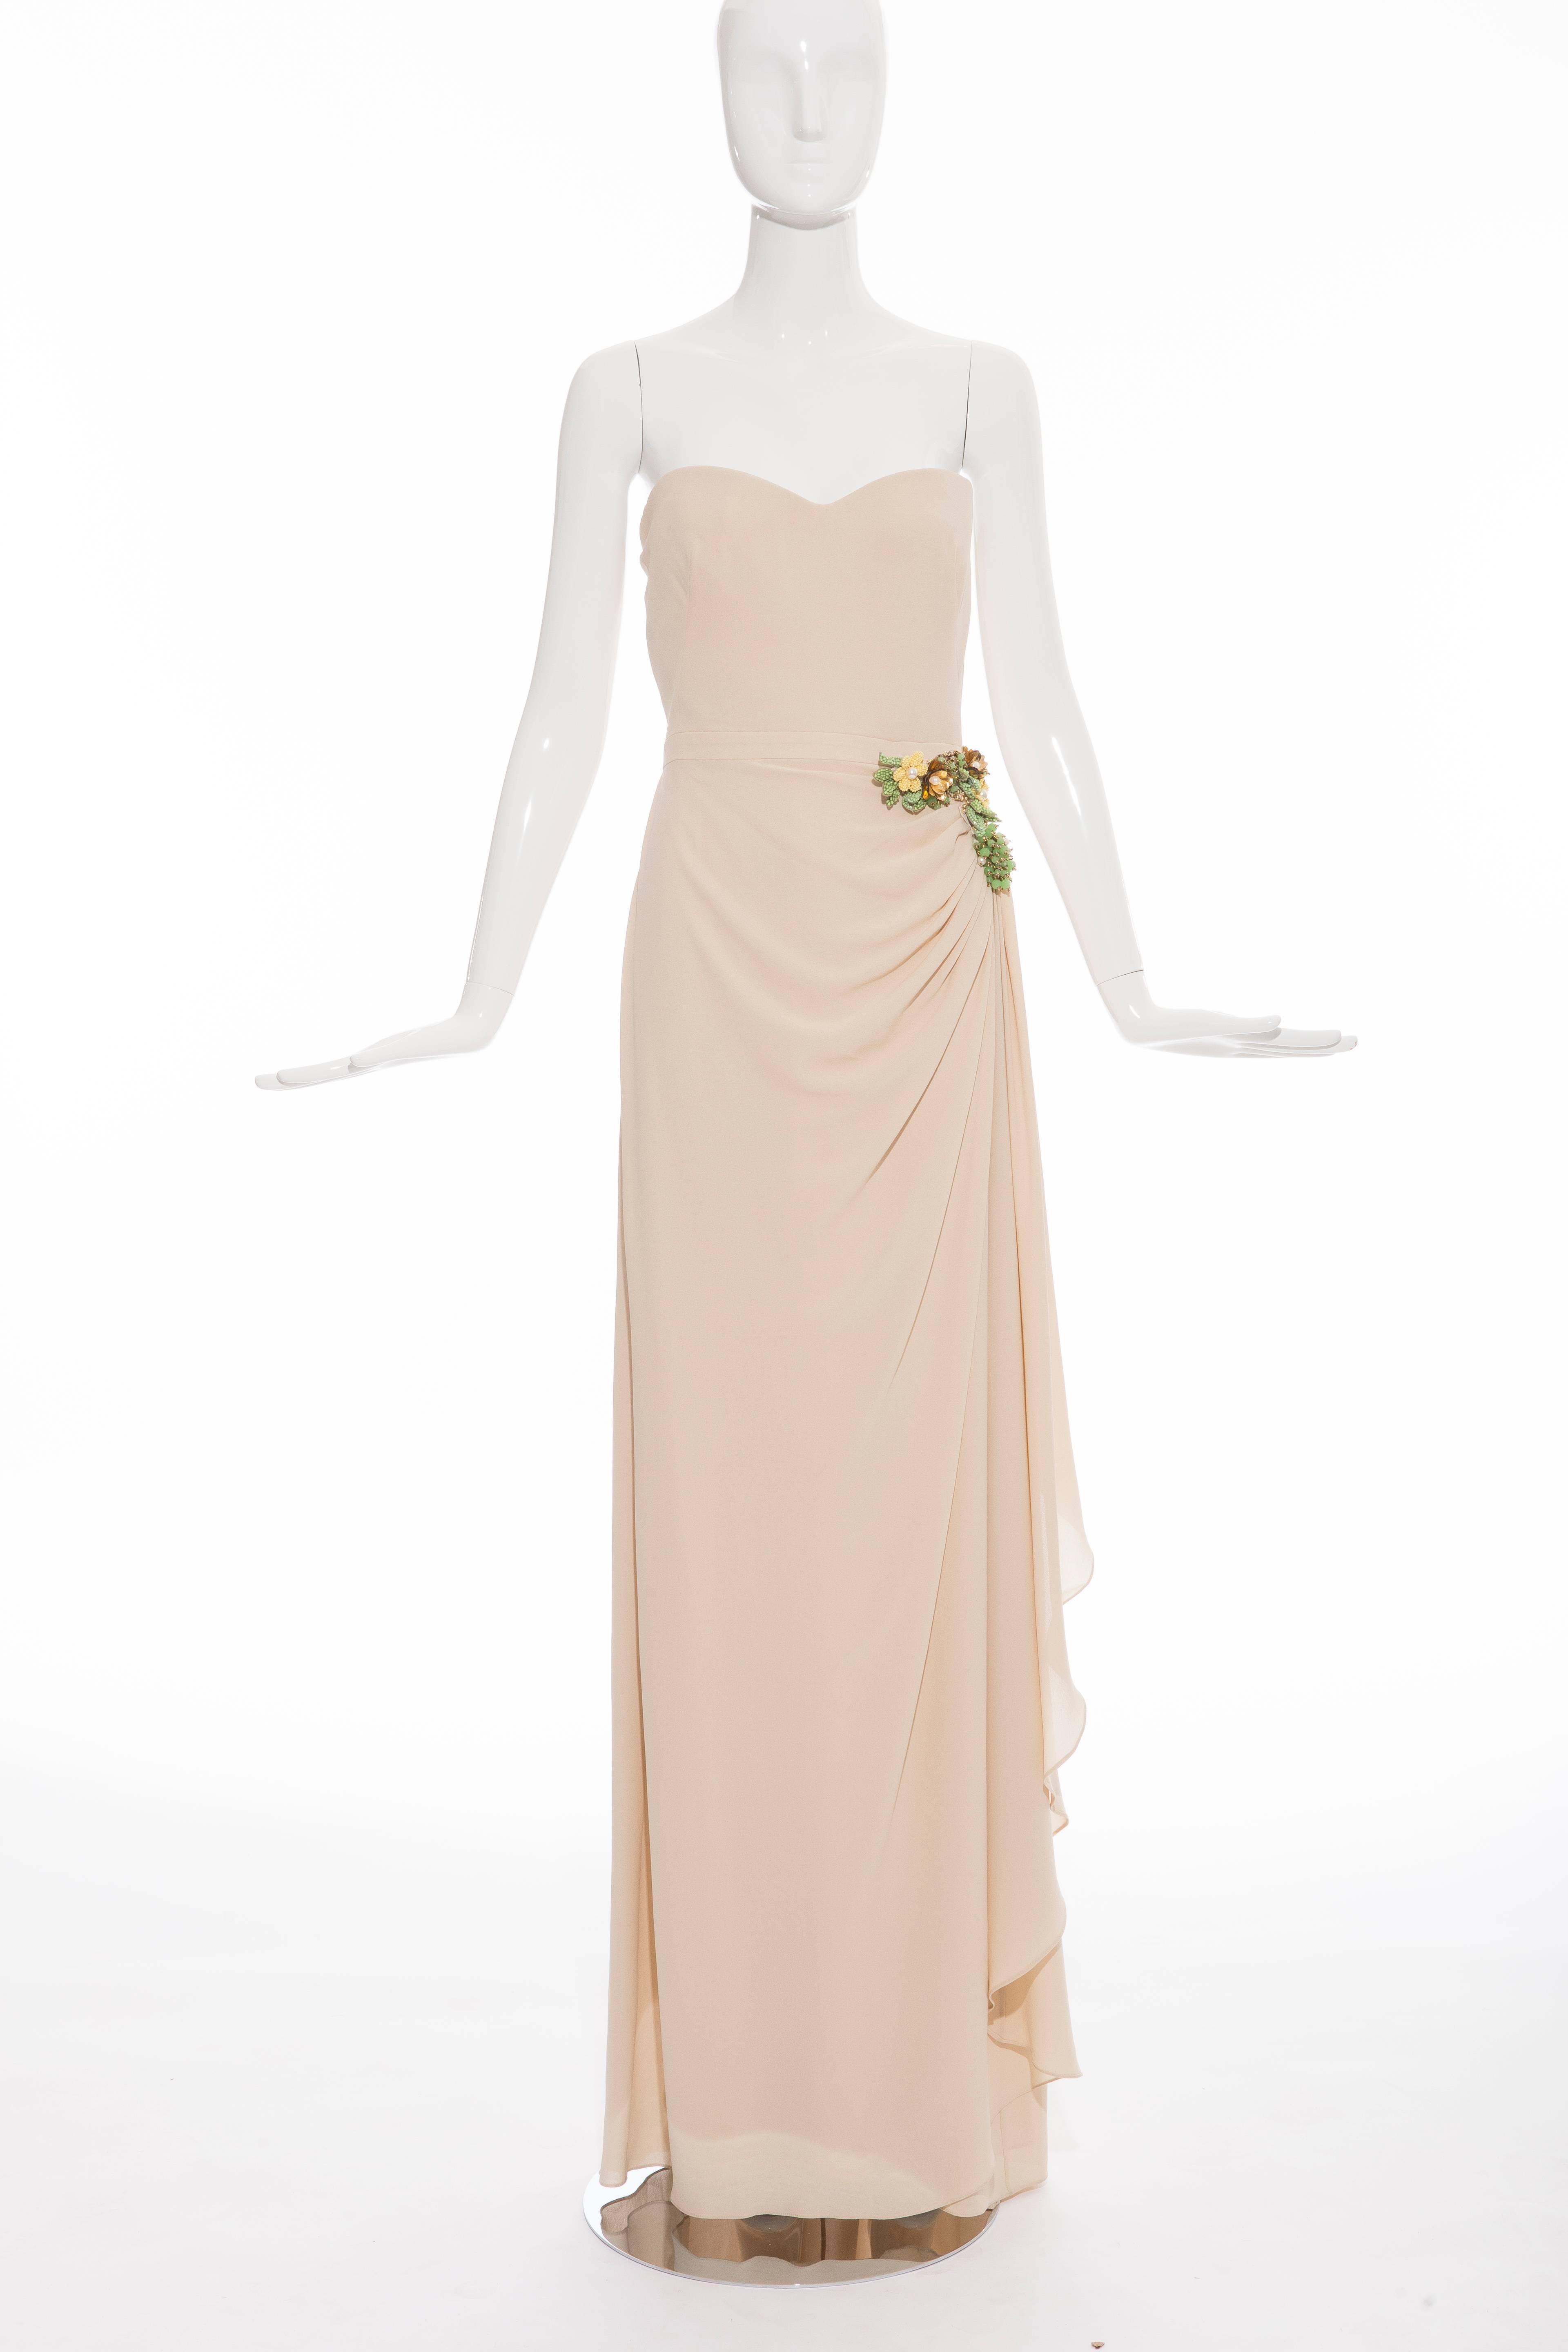 Gucci, Spring-Summer 2012, nude silk strapless sweetheart neck evening dress with draping at side, yellow, green and gold embellishments featuring pearls forming floral arrangement, concealed back zip closure and built in brassiere.

IT. 42
US.